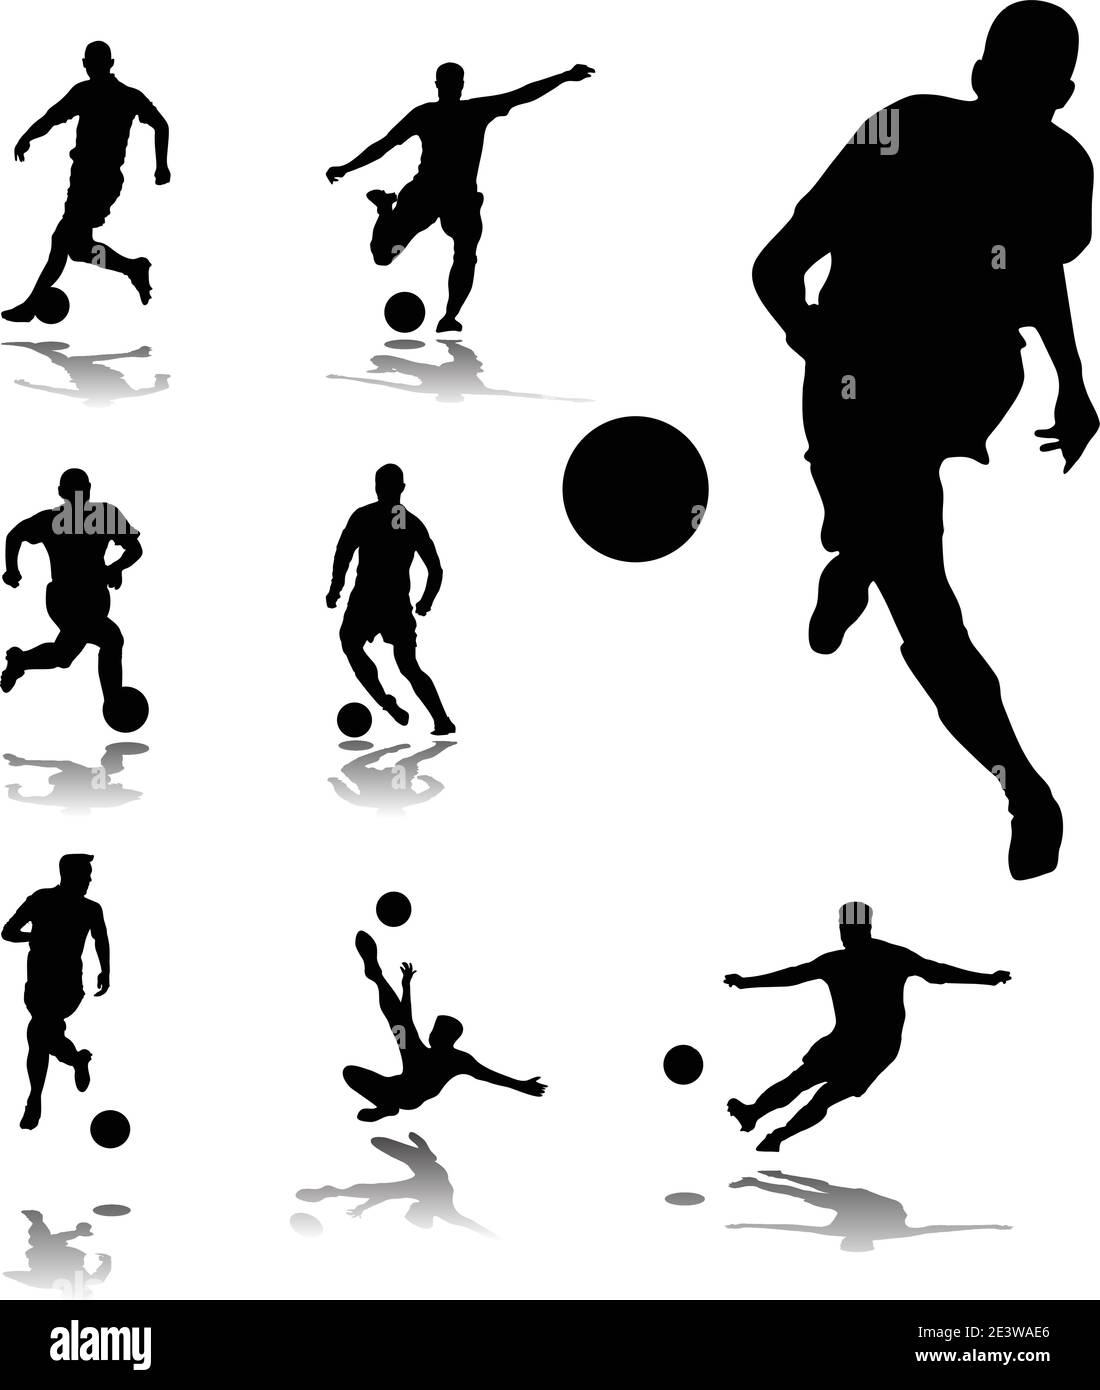 soccer players collection  in action silhouette vector Stock Vector